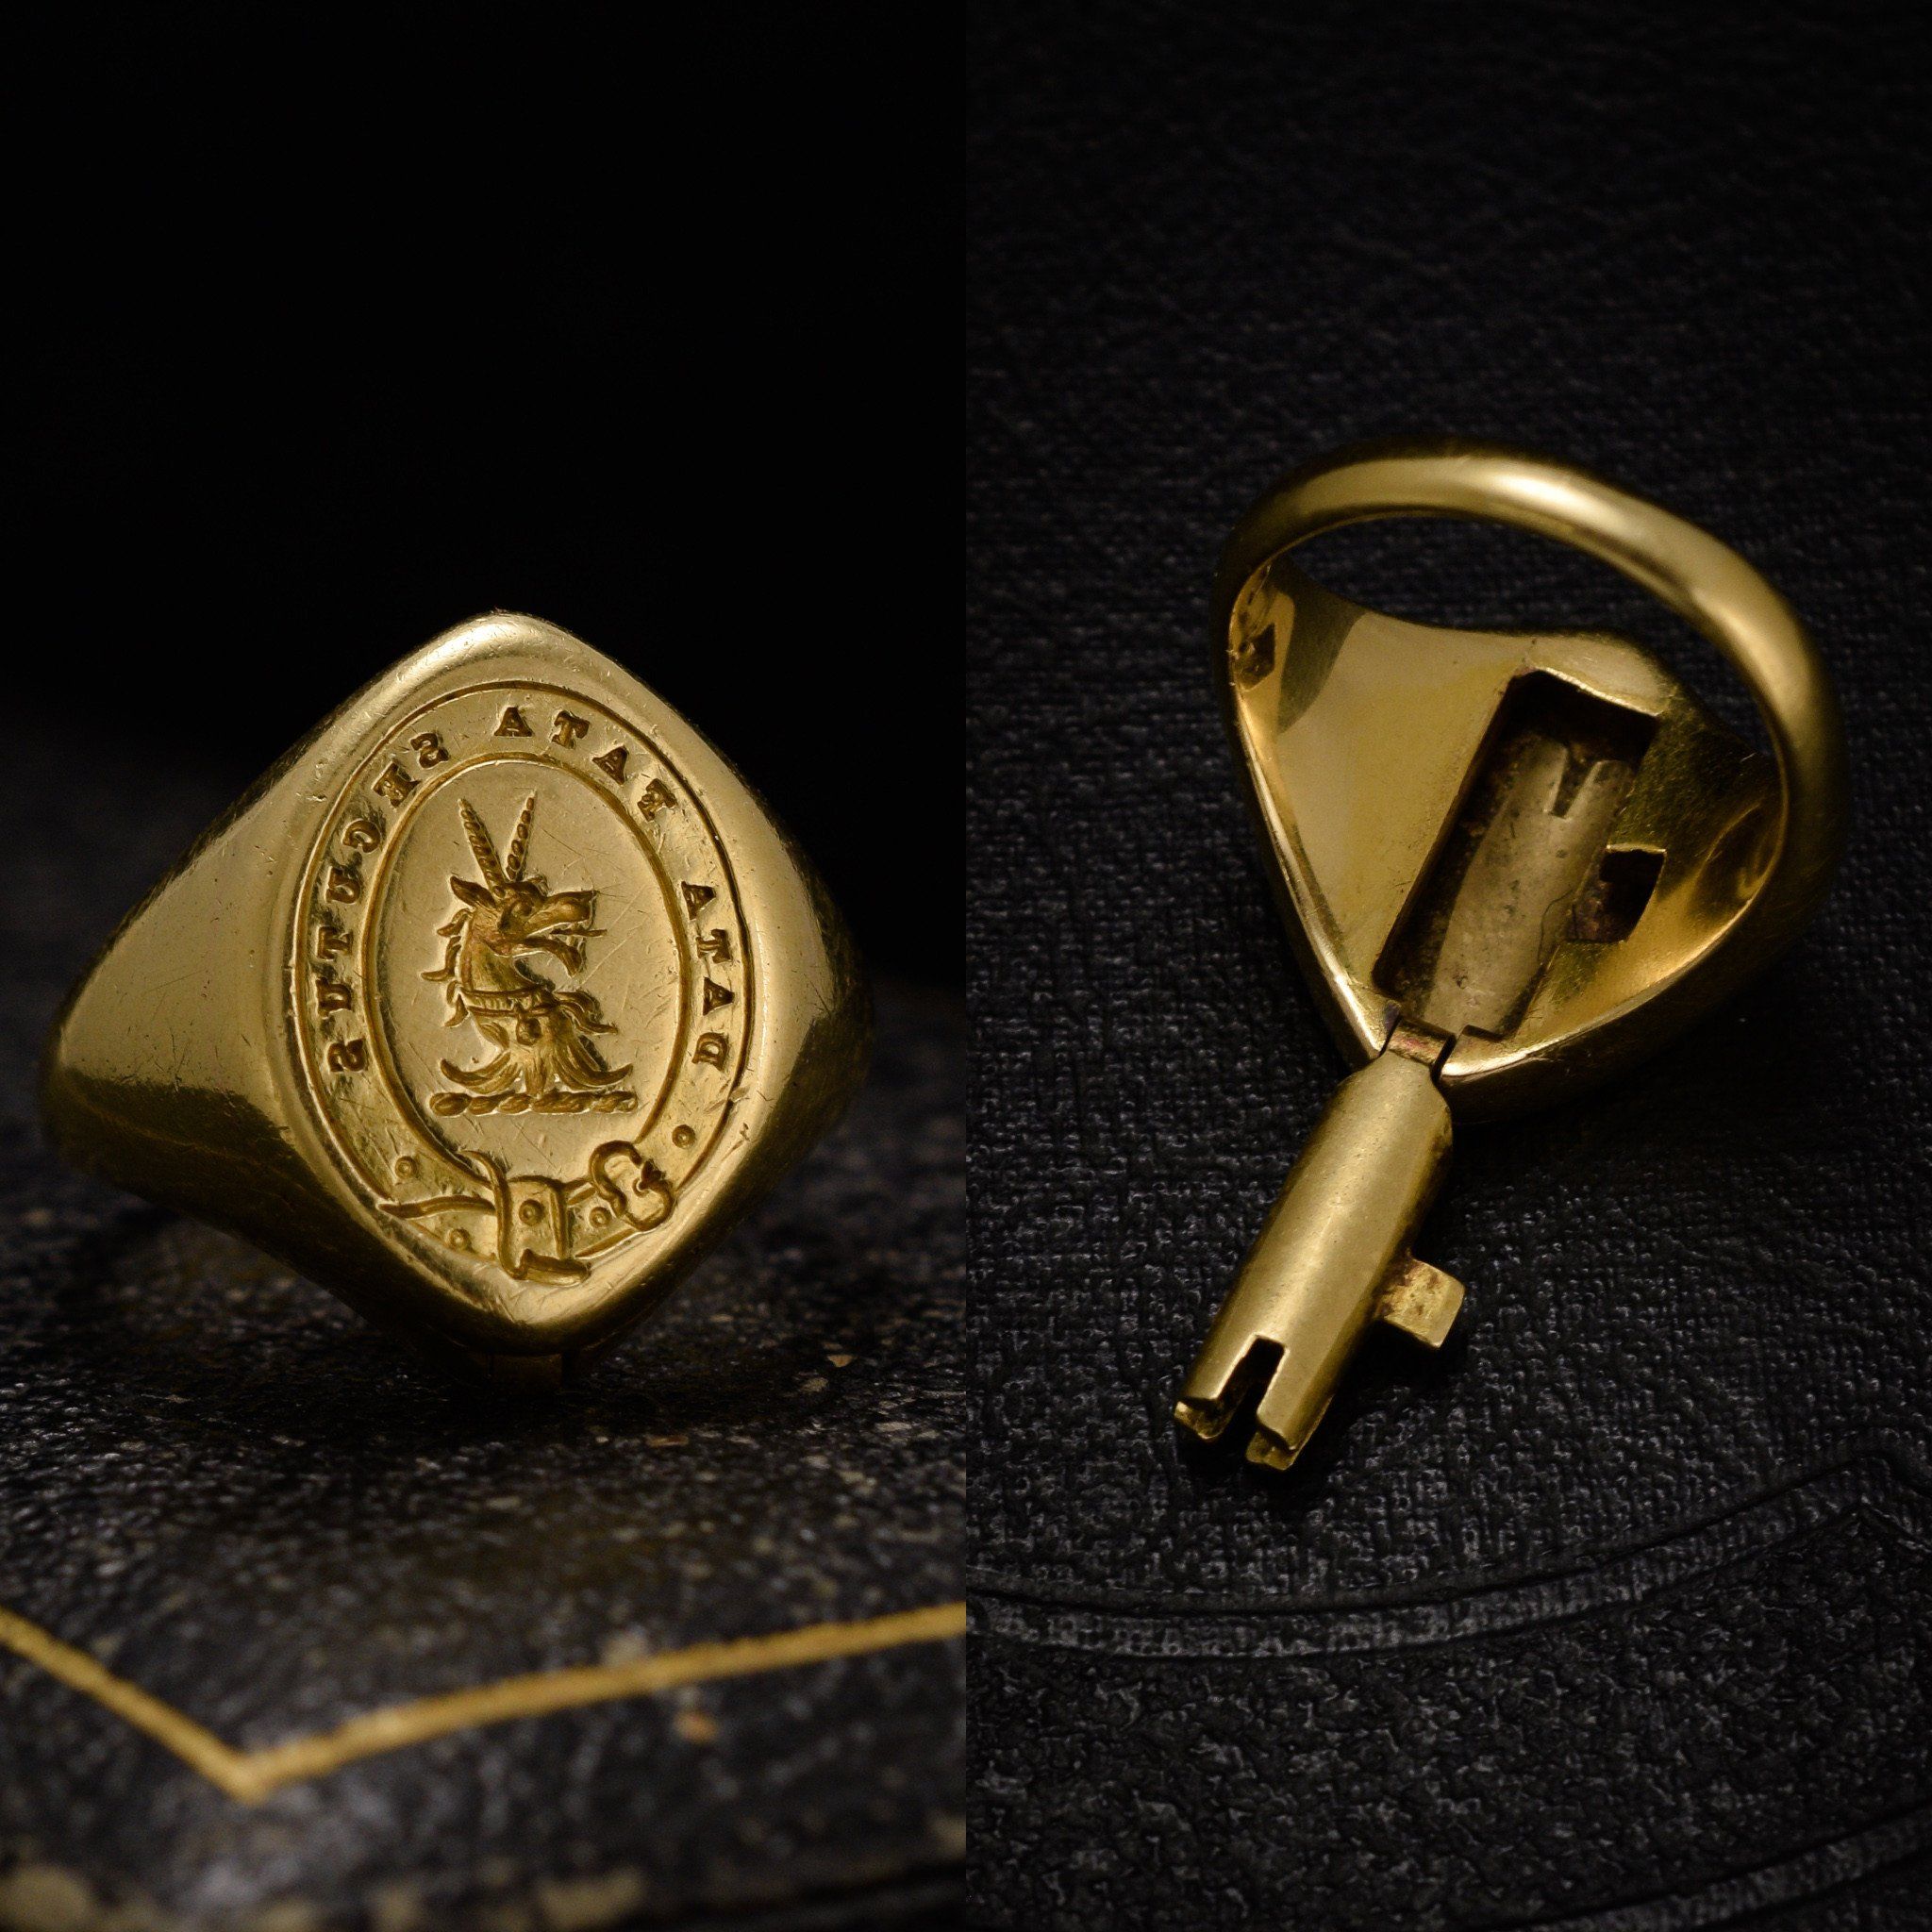 Detail of "Data Fata Secutus" Signet Ring with Concealed Jewelry Box Key